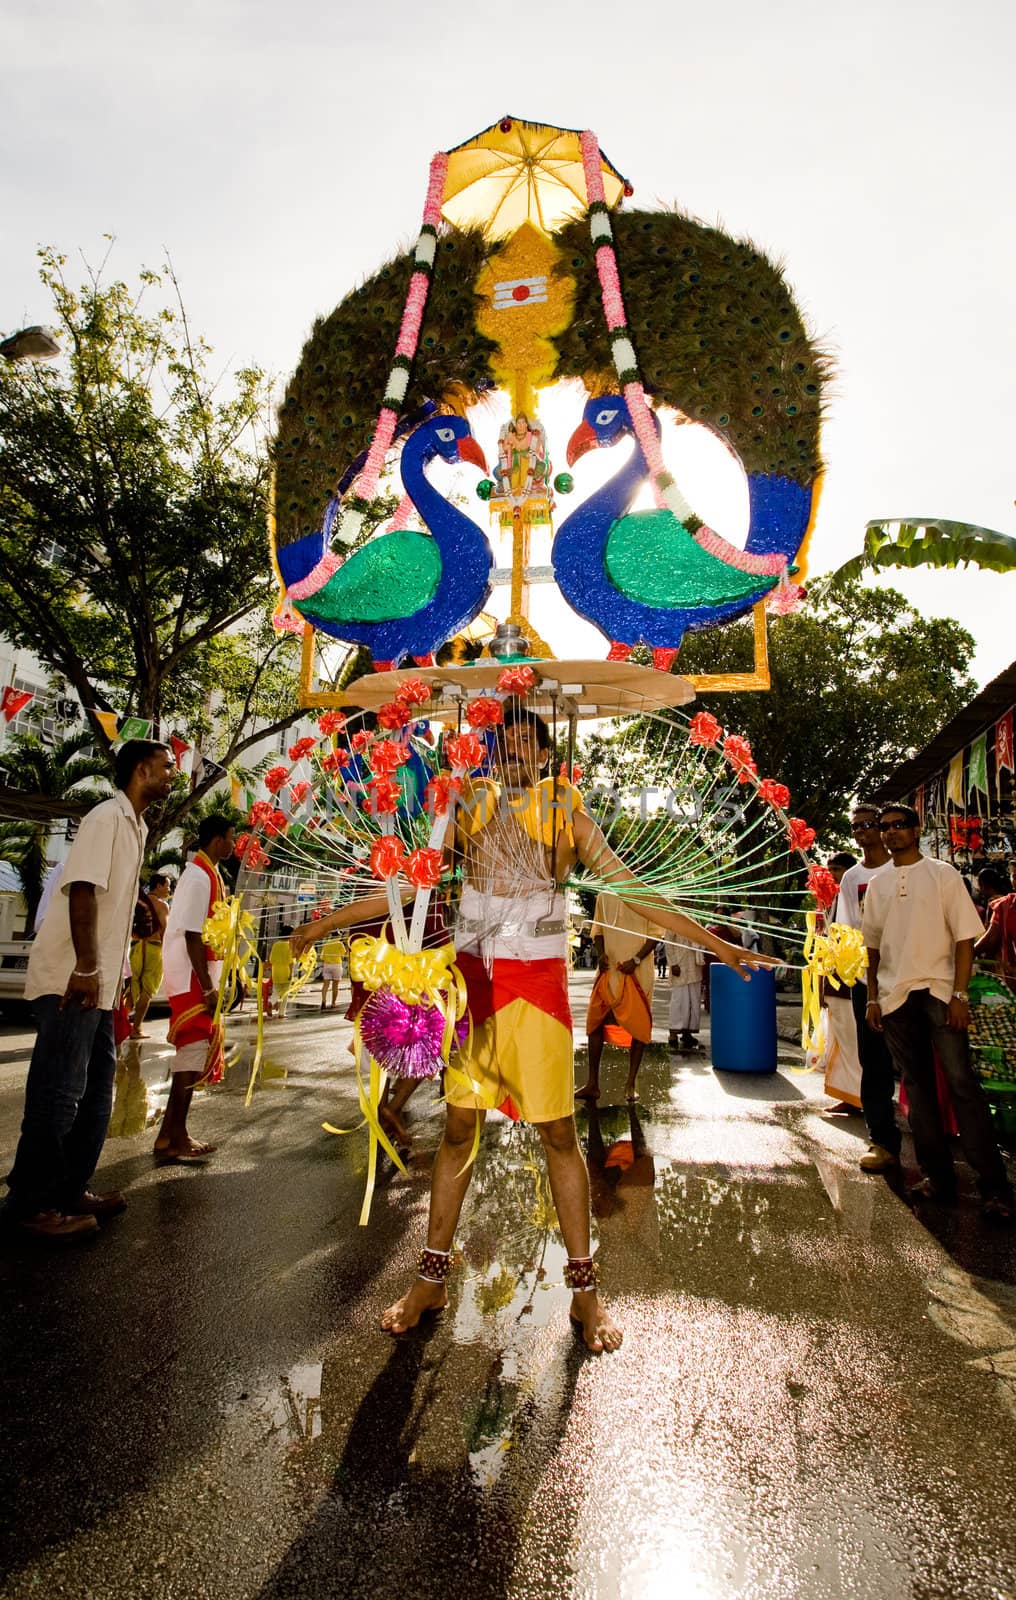 man carrying a heavily decorated kavadi for his beliefs